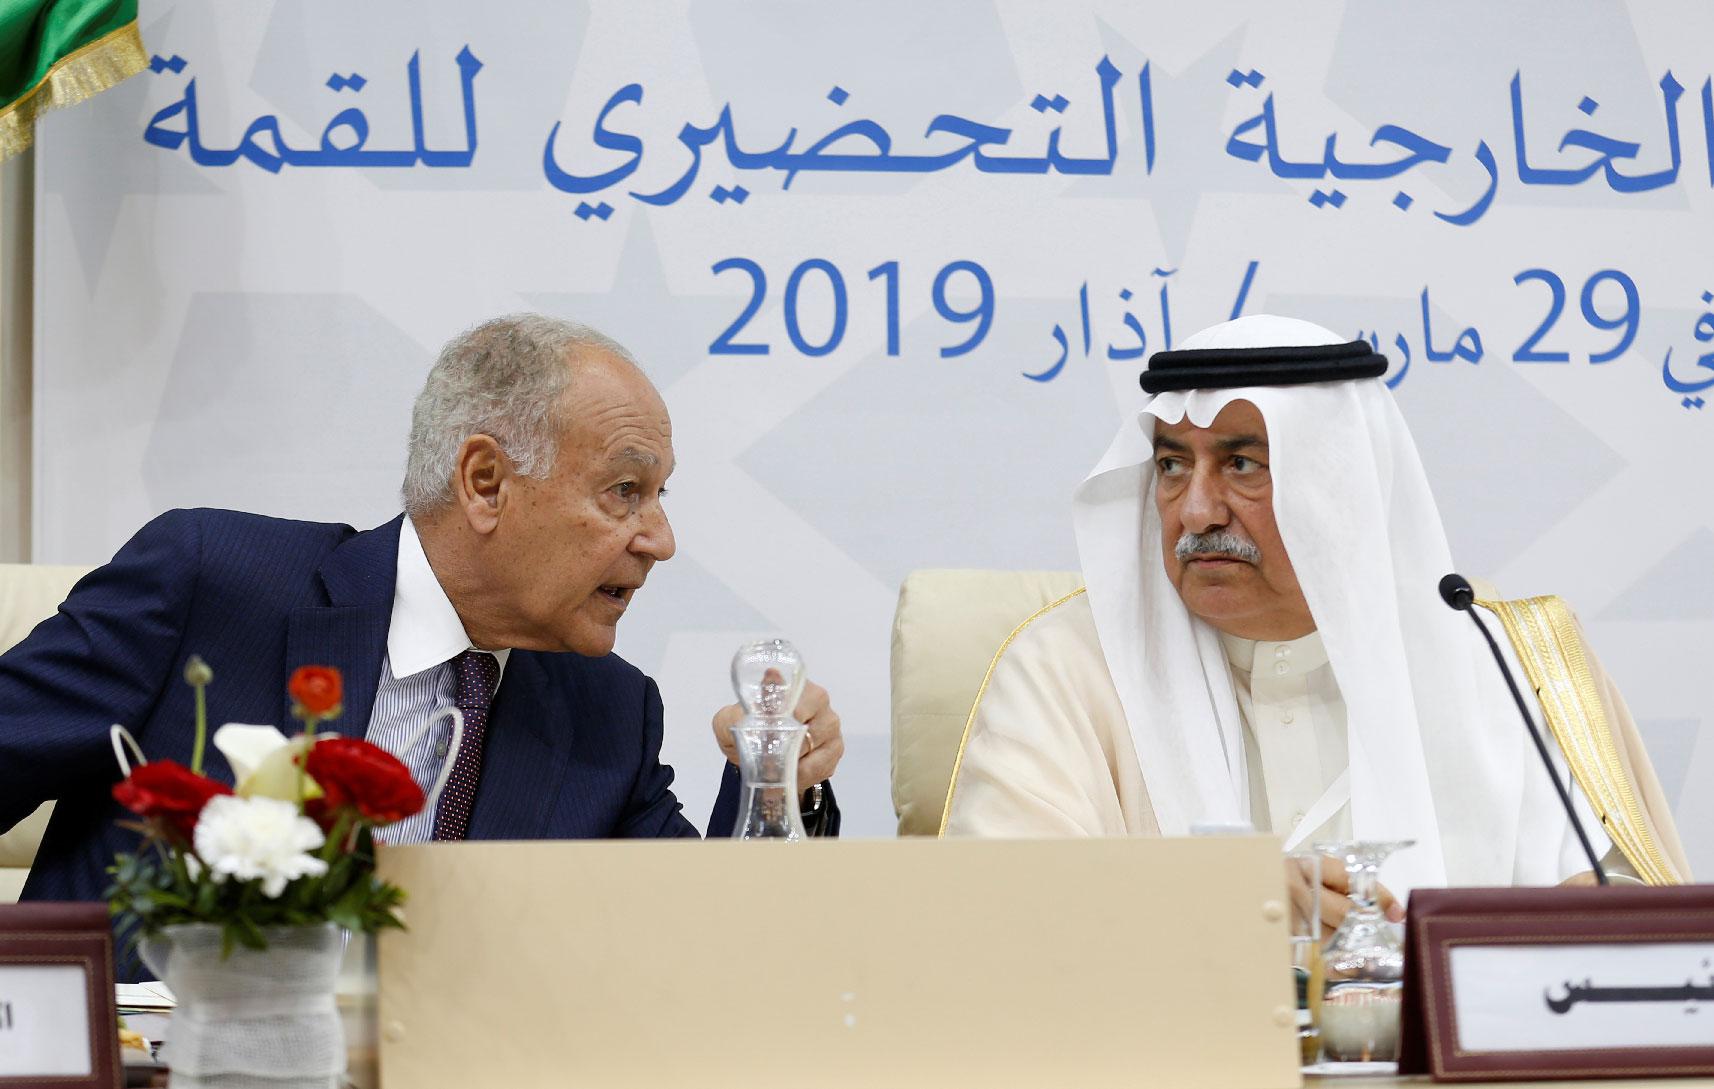 Arab League Secretary-General Ahmed Abul Gheit speaks to Saudi Arabia's Foreign Minister Ibrahim al-Assaf during a preparatory meeting with Arab foreign ministers ahead of the Arab summit in Tunis, Tunisia March 29, 2019.